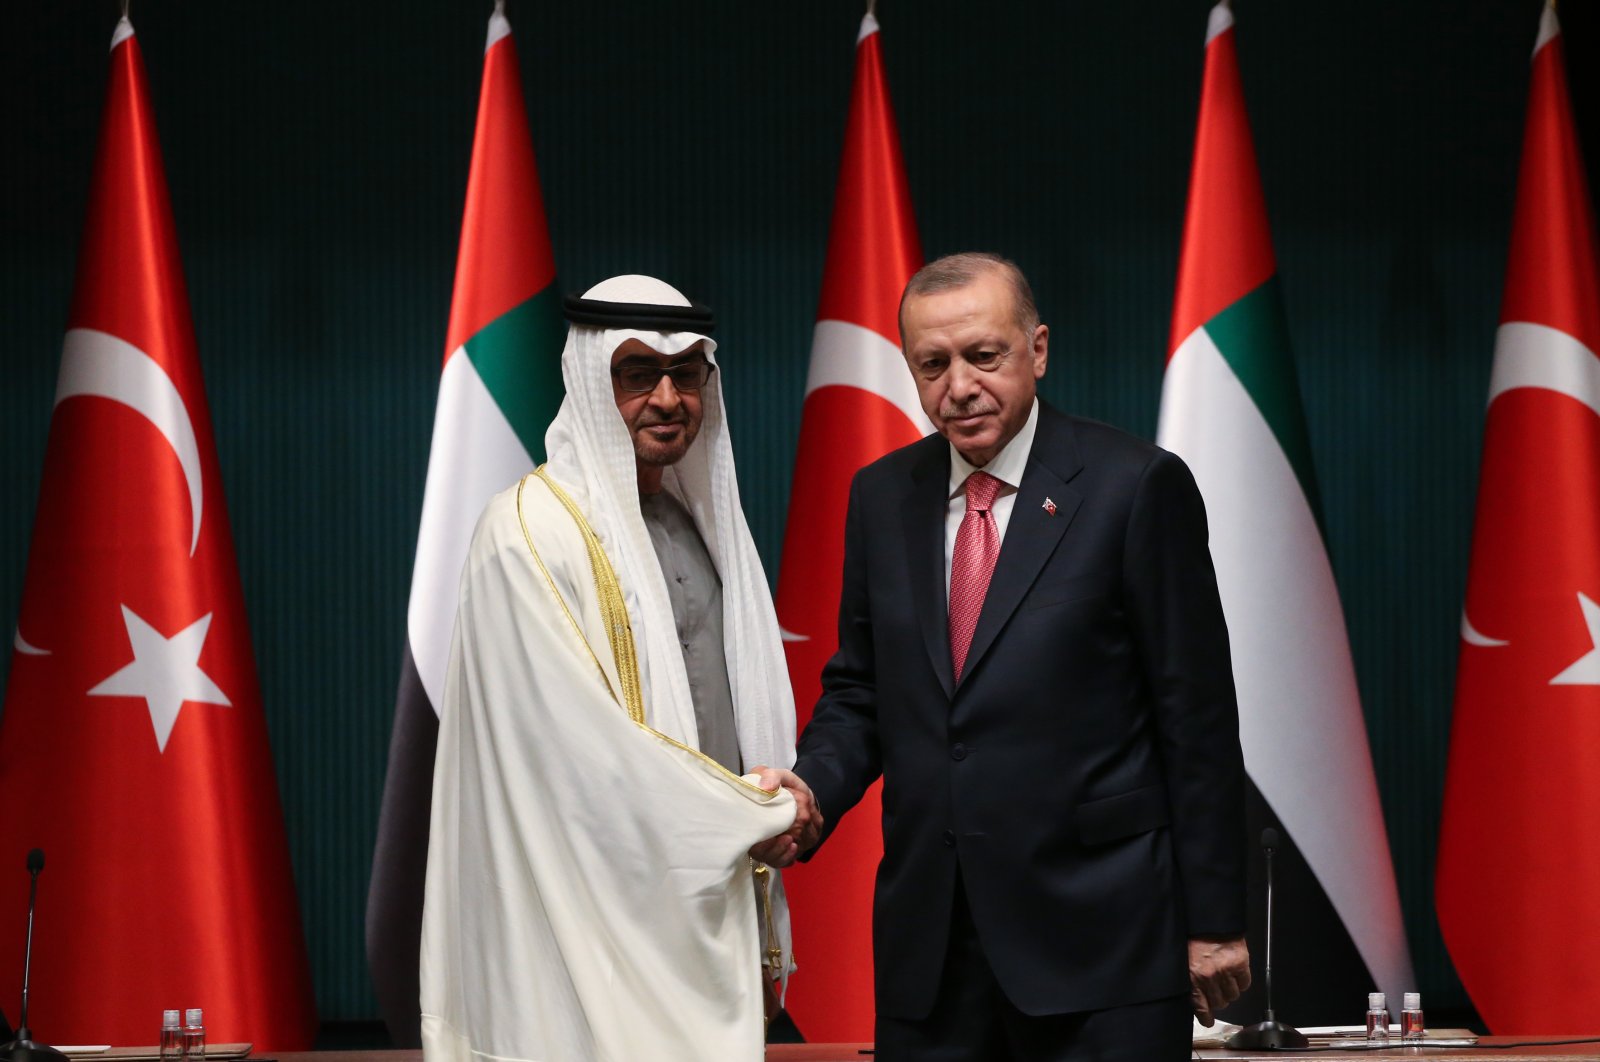 President Recep Tayyip Erdoğan (R) and Abu Dhabi Crown Prince Sheikh Mohammed bin Zayed (MBZ) shake hands during a ceremony after their meeting at the Presidential Palace in Ankara, Turkey, Nov. 24, 2021. (EPA Photo)